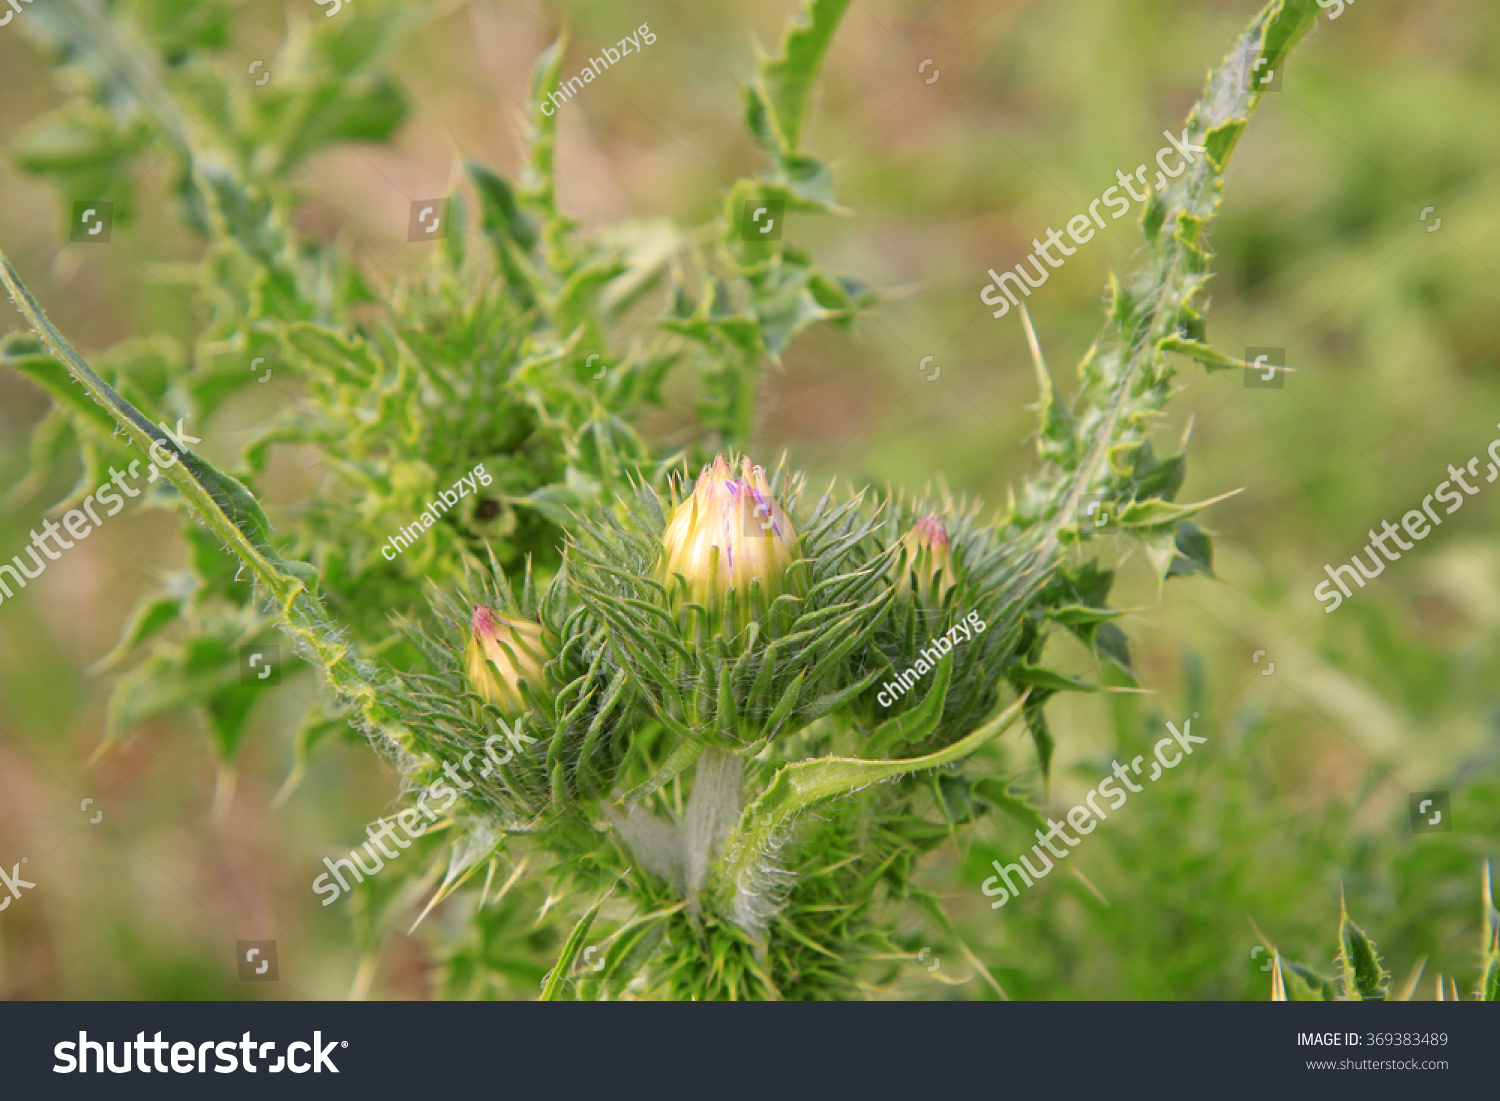 thistle flowerÃ¯Â¼?medicinal plants in the fields, closeup of photo #369383489